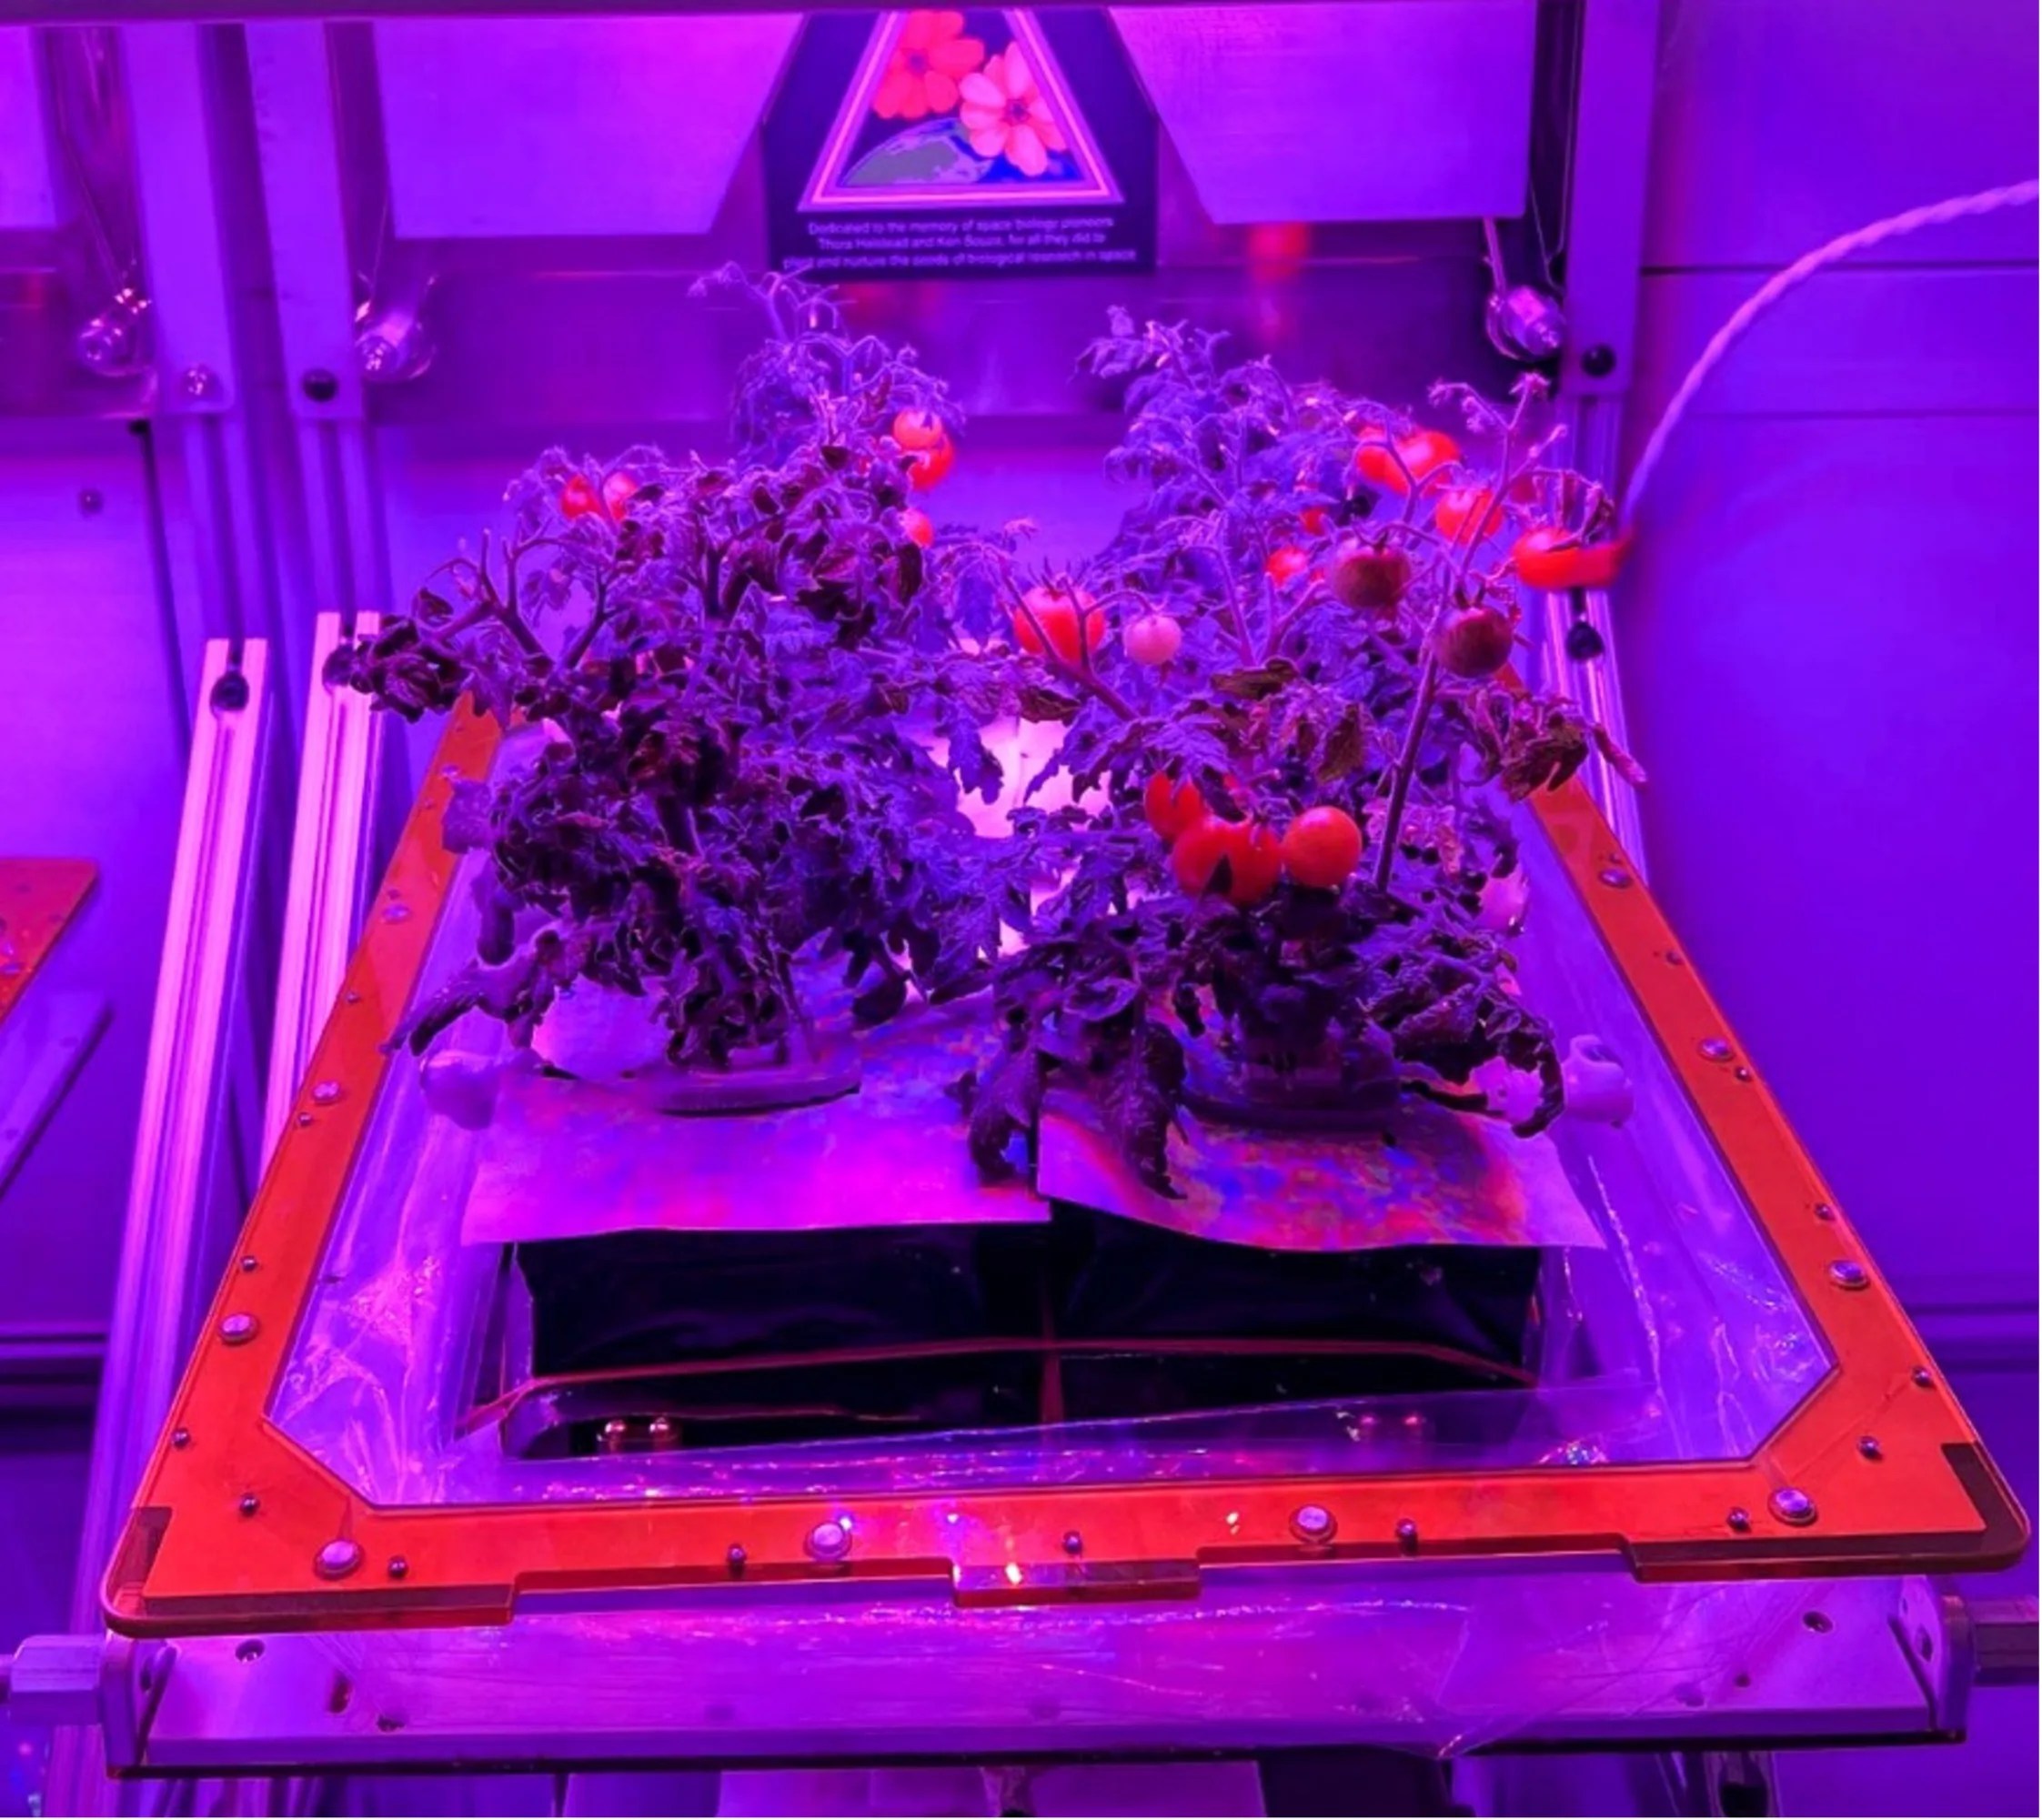 Small red tomatoes growing under a flat metallic fixture that’s bathing the fruiting plants in blue and red lights, creating a purple hue. The plants are growing out of a red-framed open-box enclosure. Within the enclosure are black-padded pots made of a strong-water resistant flexible material called a flight pillow. This flight pillow encloses the base of the plants with a flat, white material.